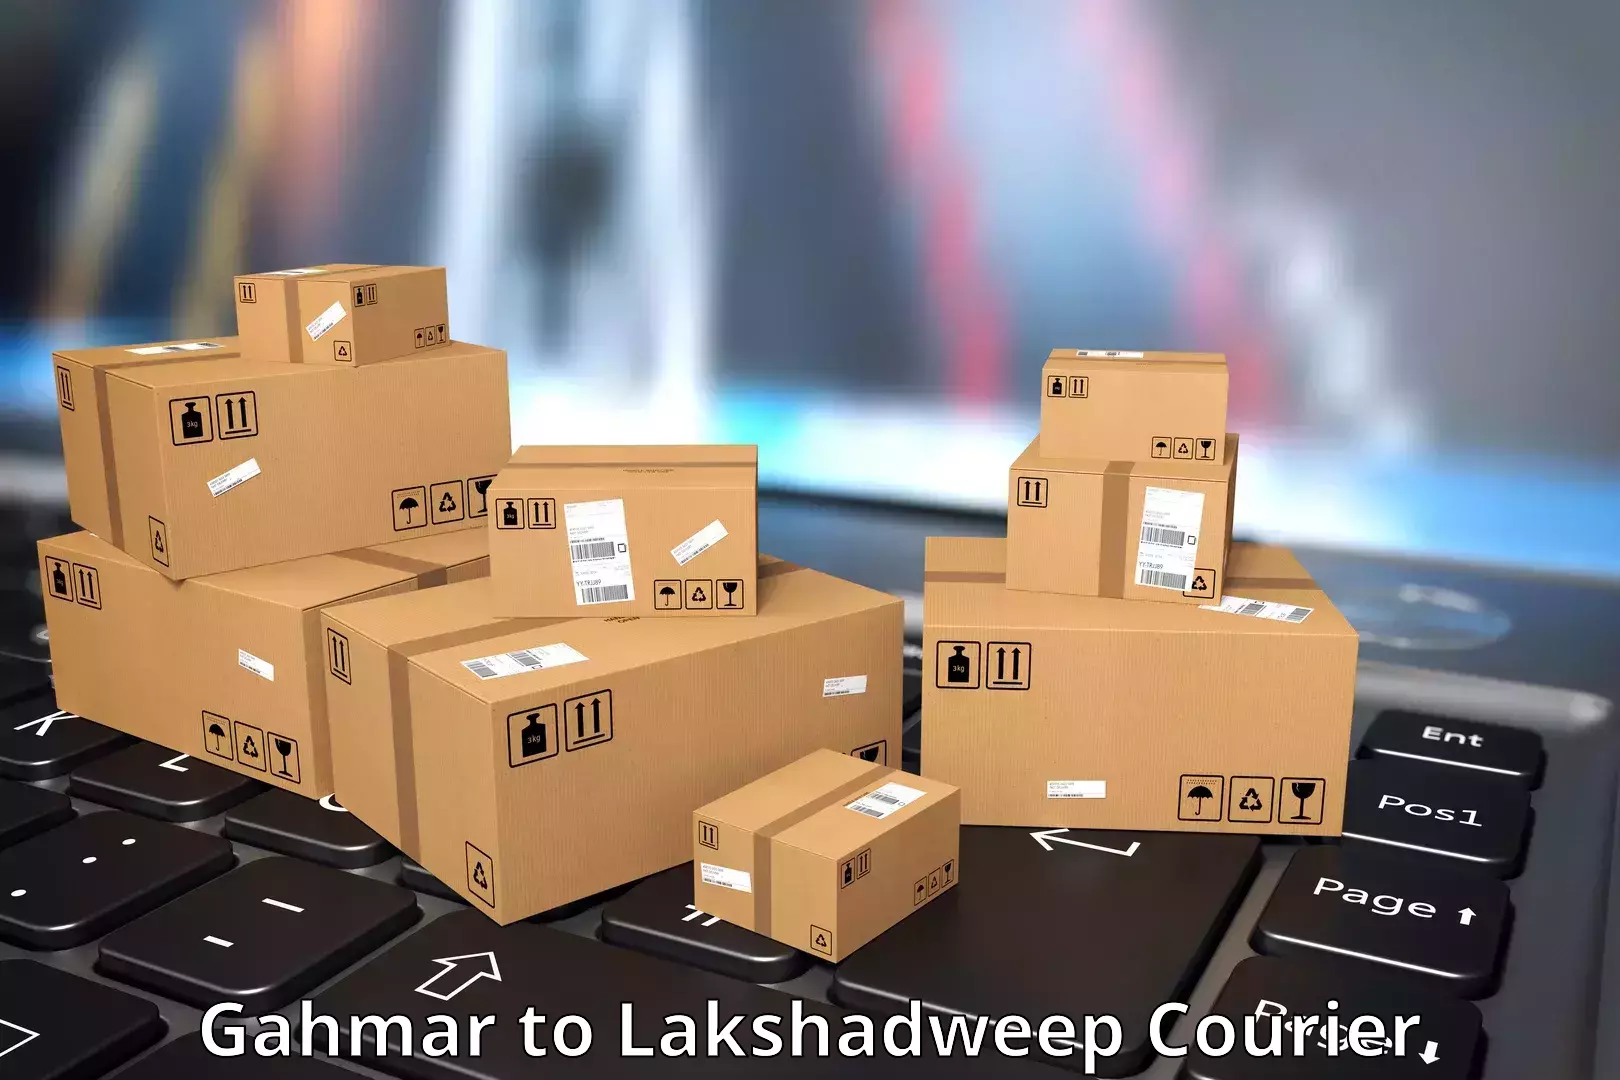 Courier service innovation in Gahmar to Lakshadweep